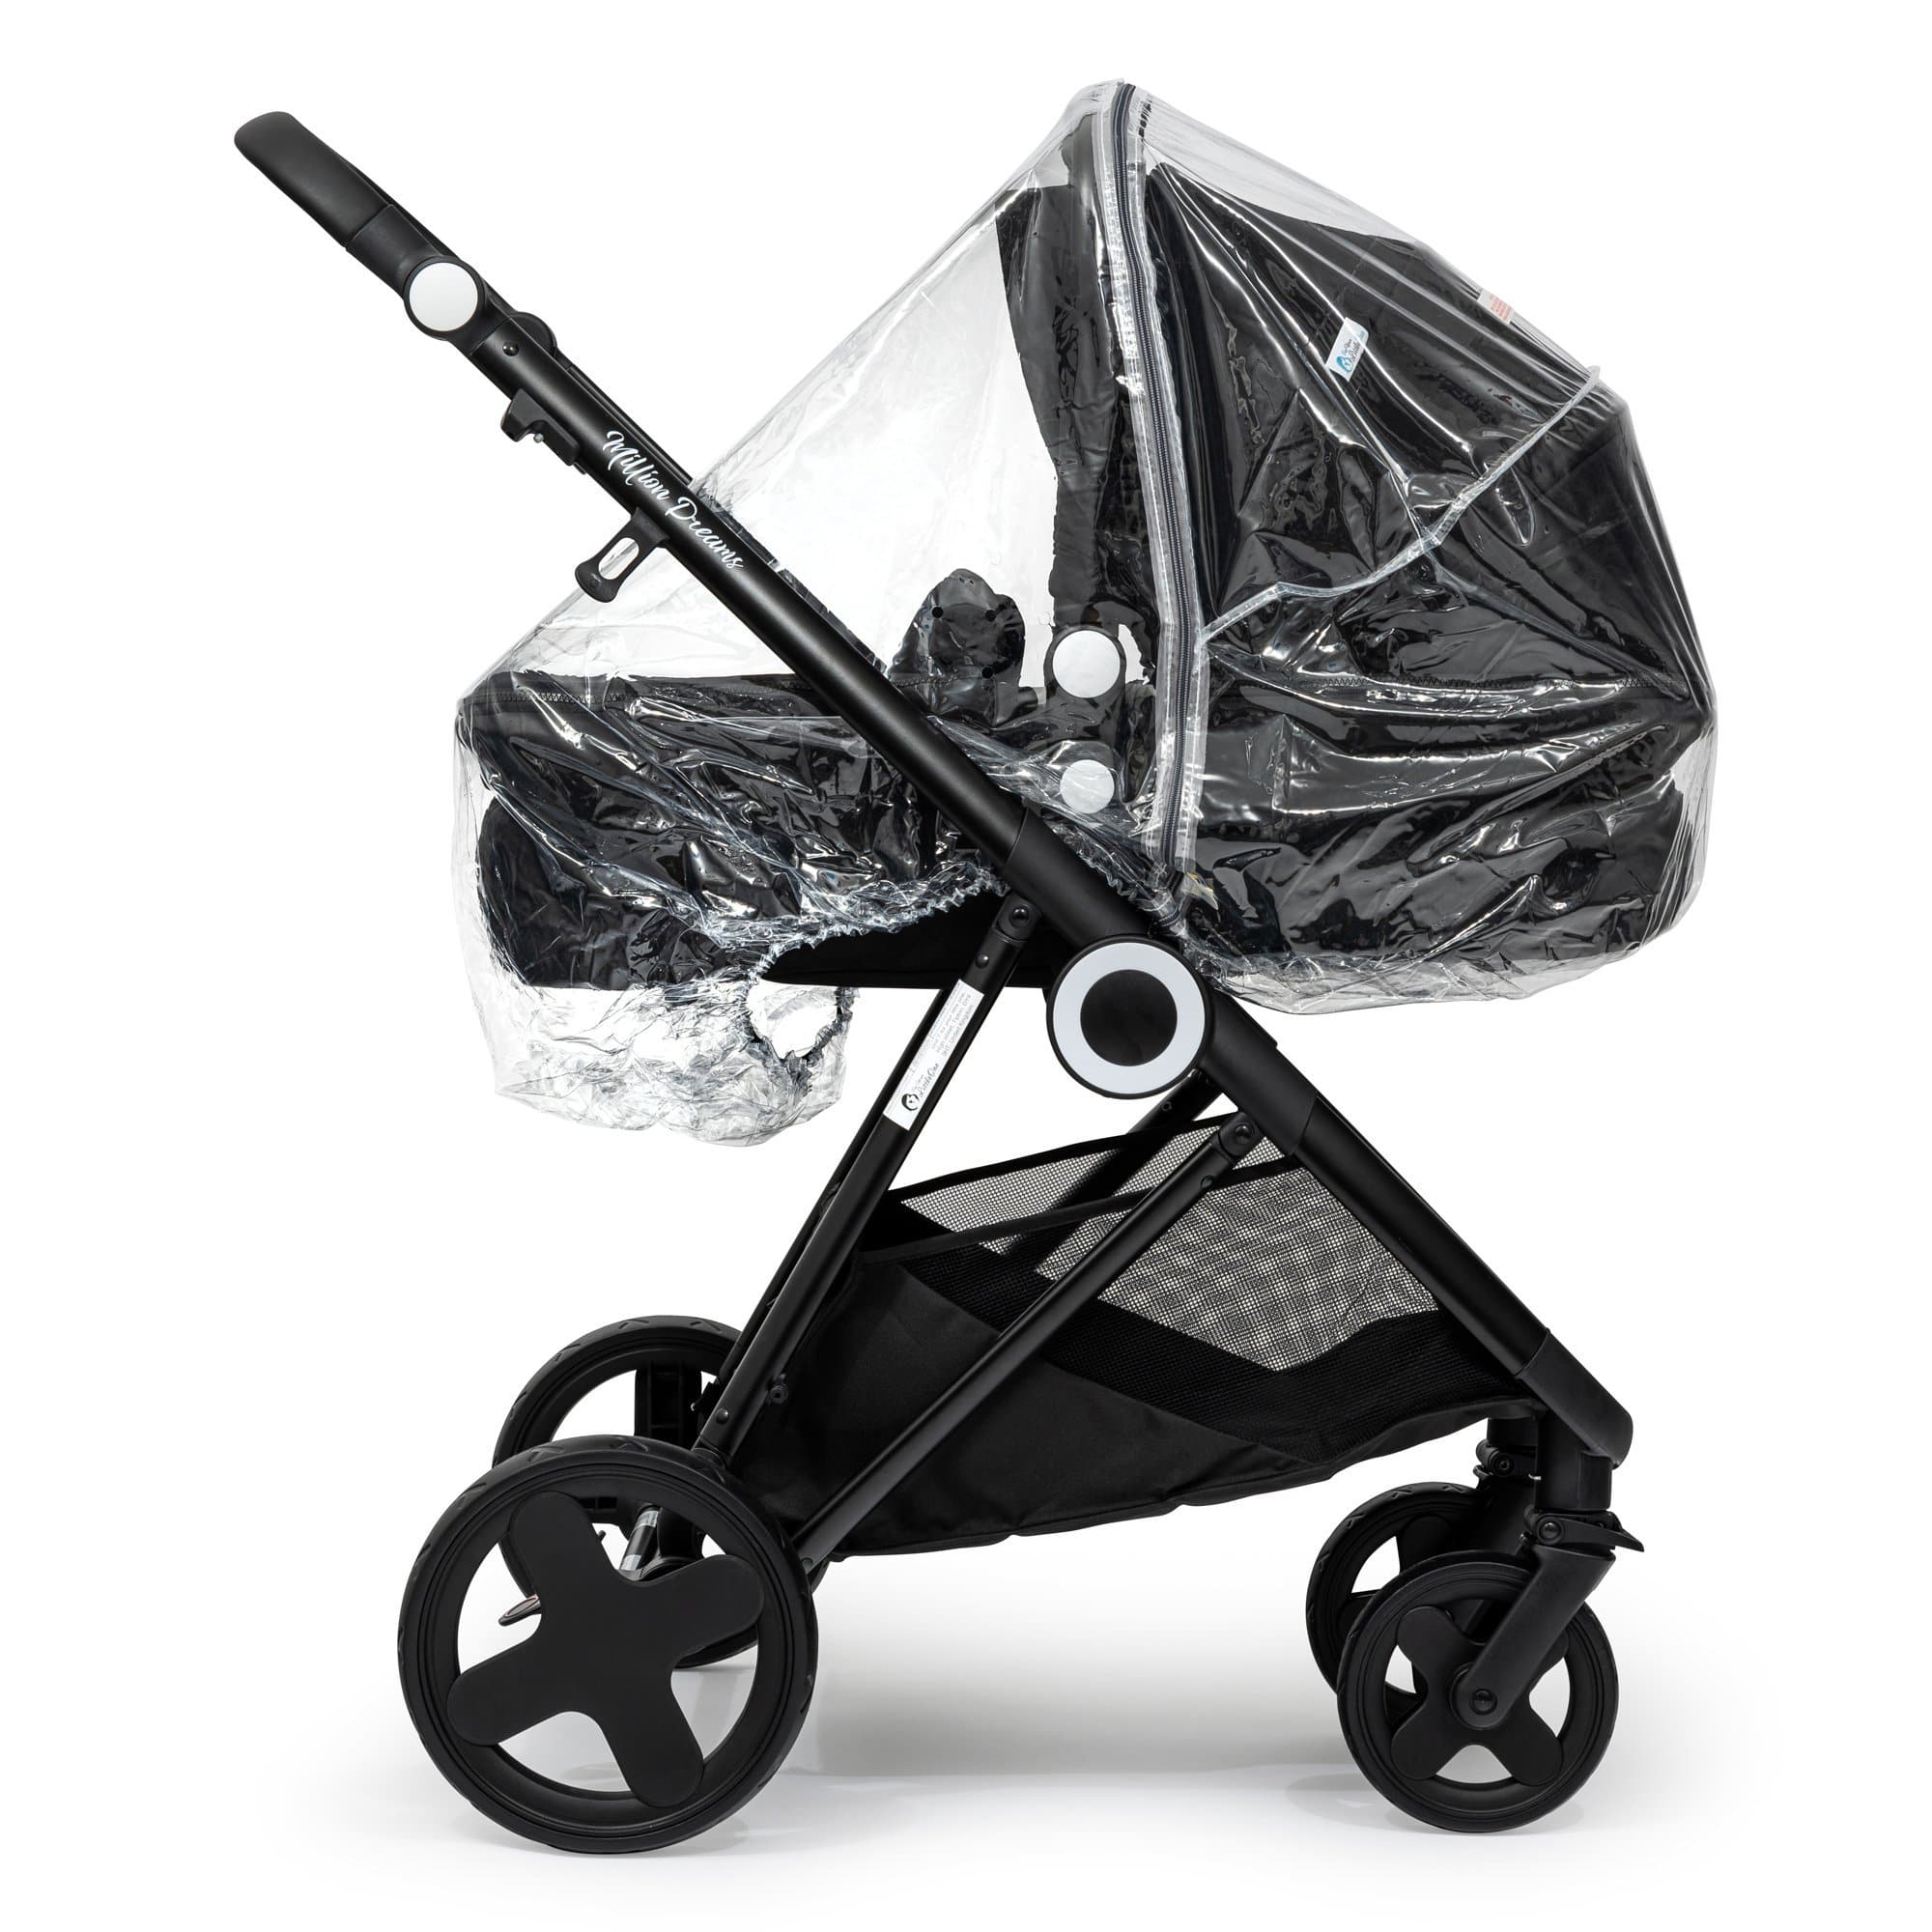 2 in 1 Rain Cover Compatible with Kiddicouture - Fits All Models -  | For Your Little One